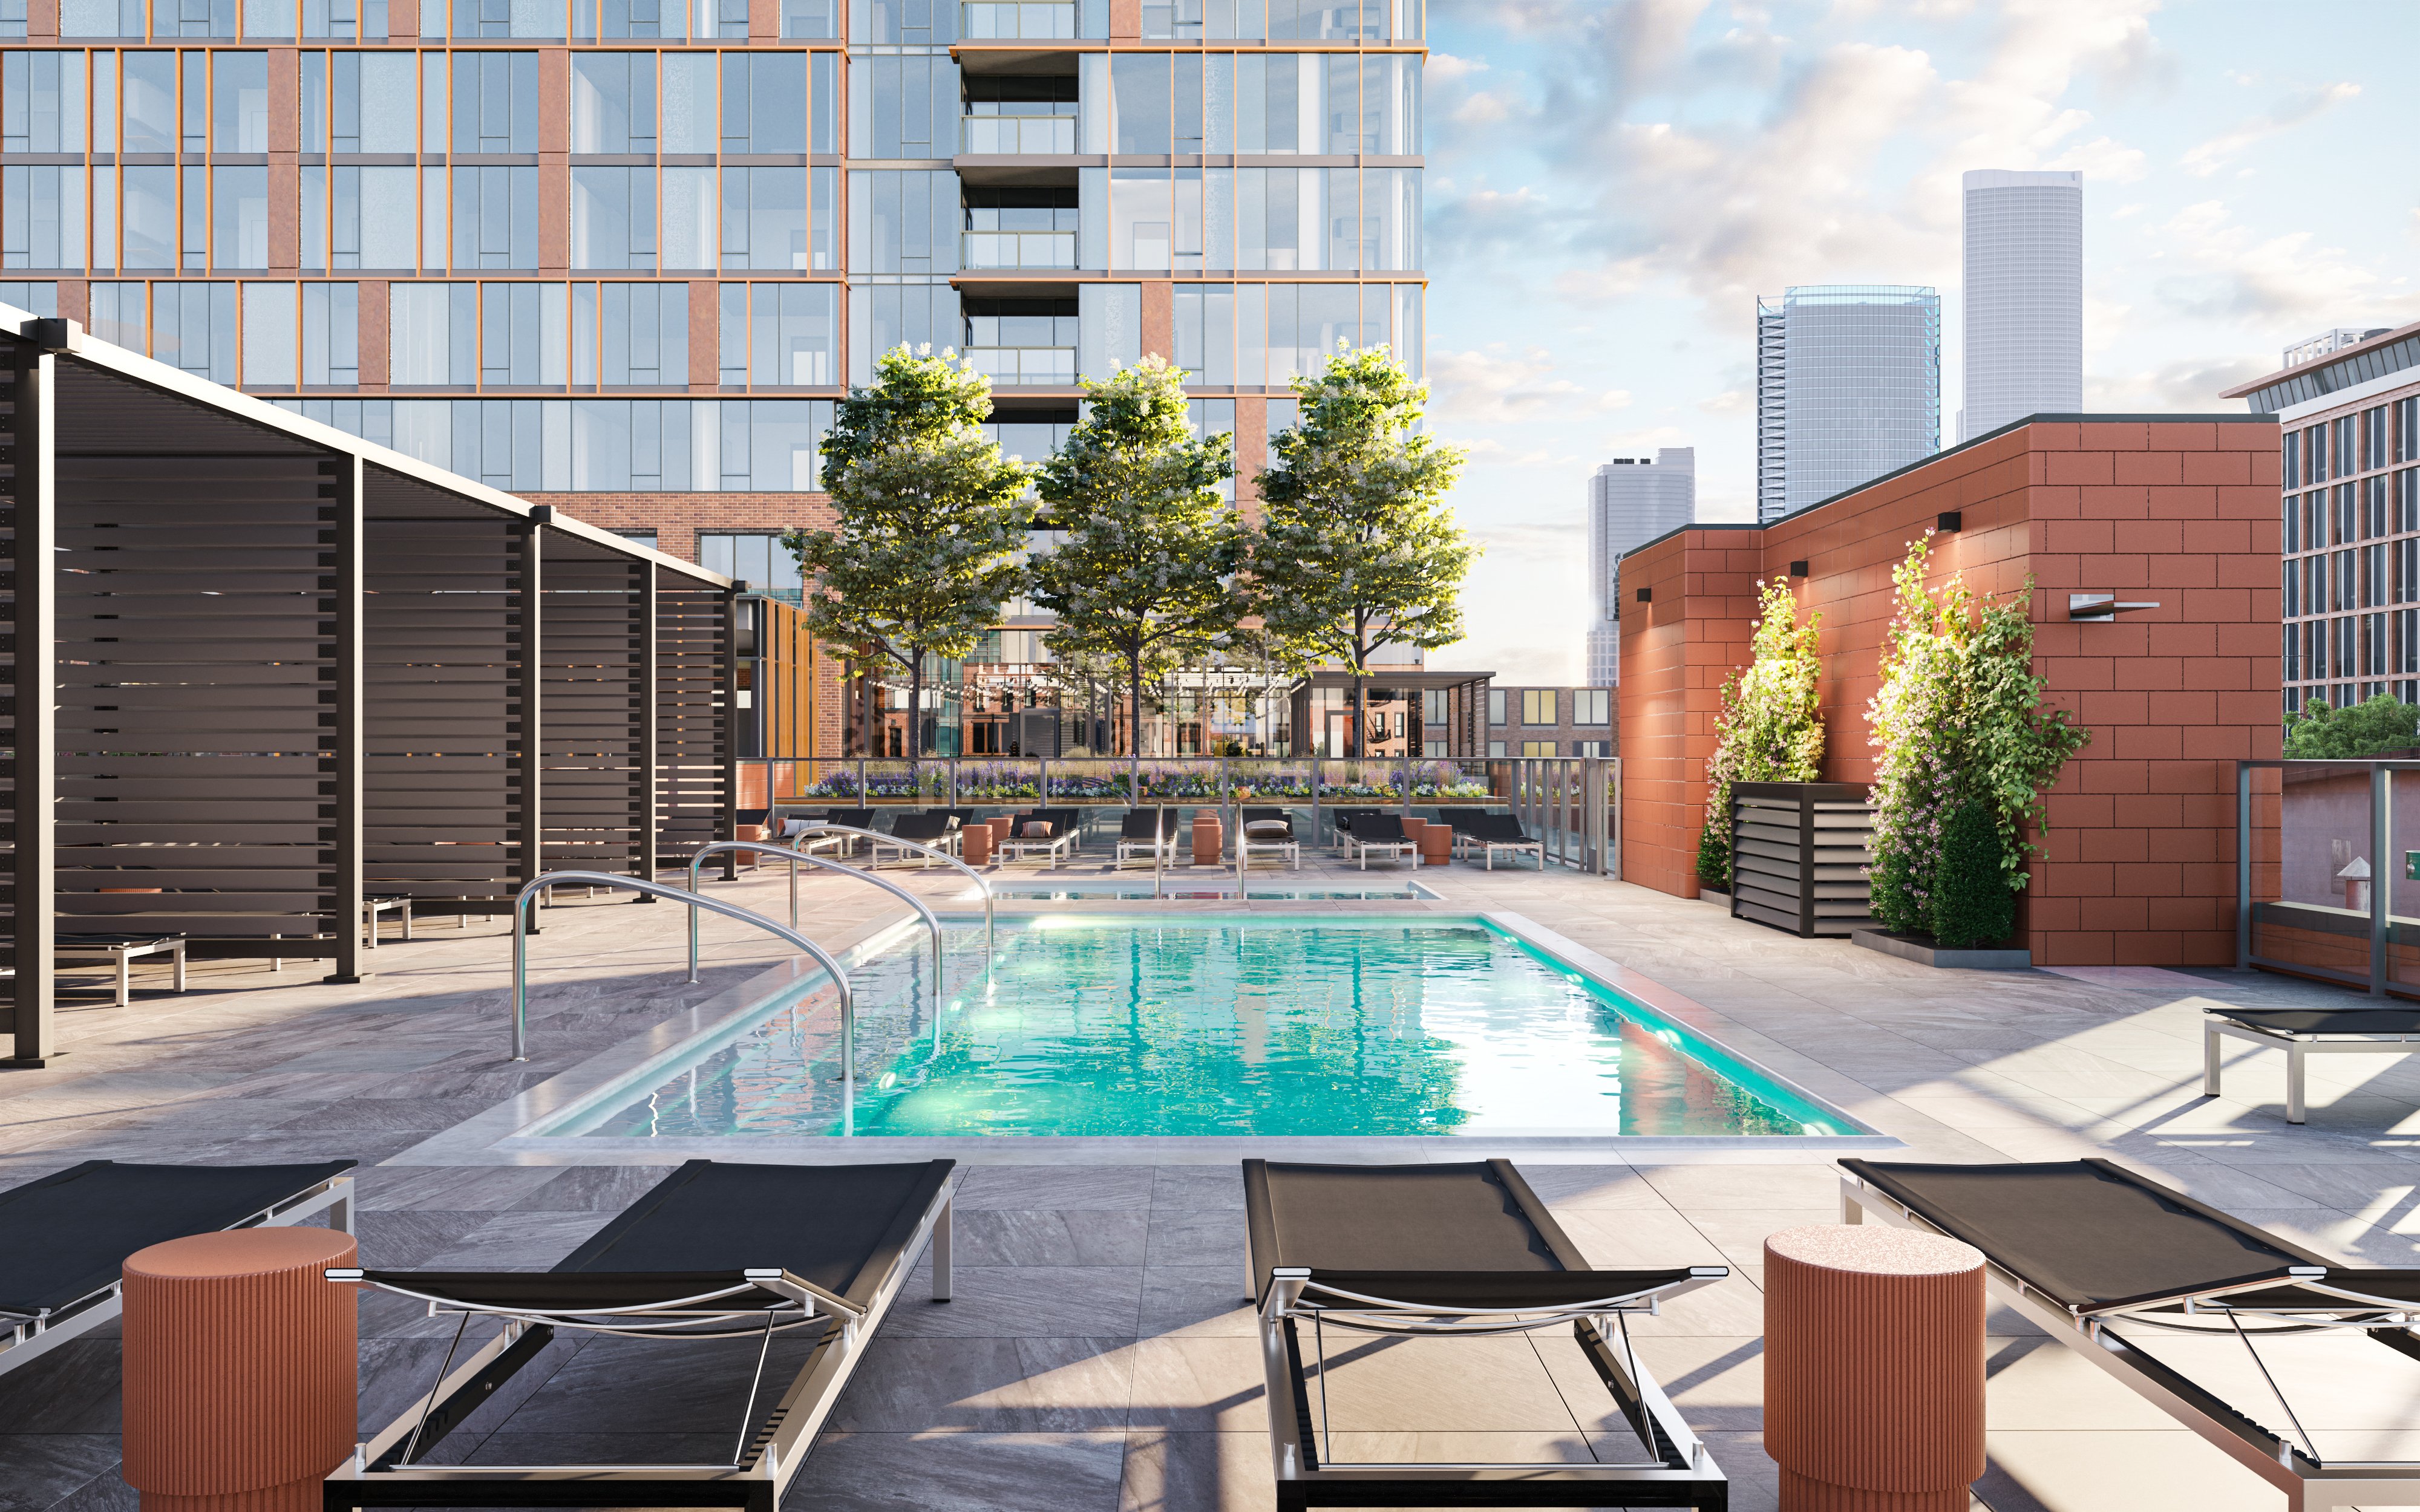 Exterior 3D rendering of an apartment community rooftop pool